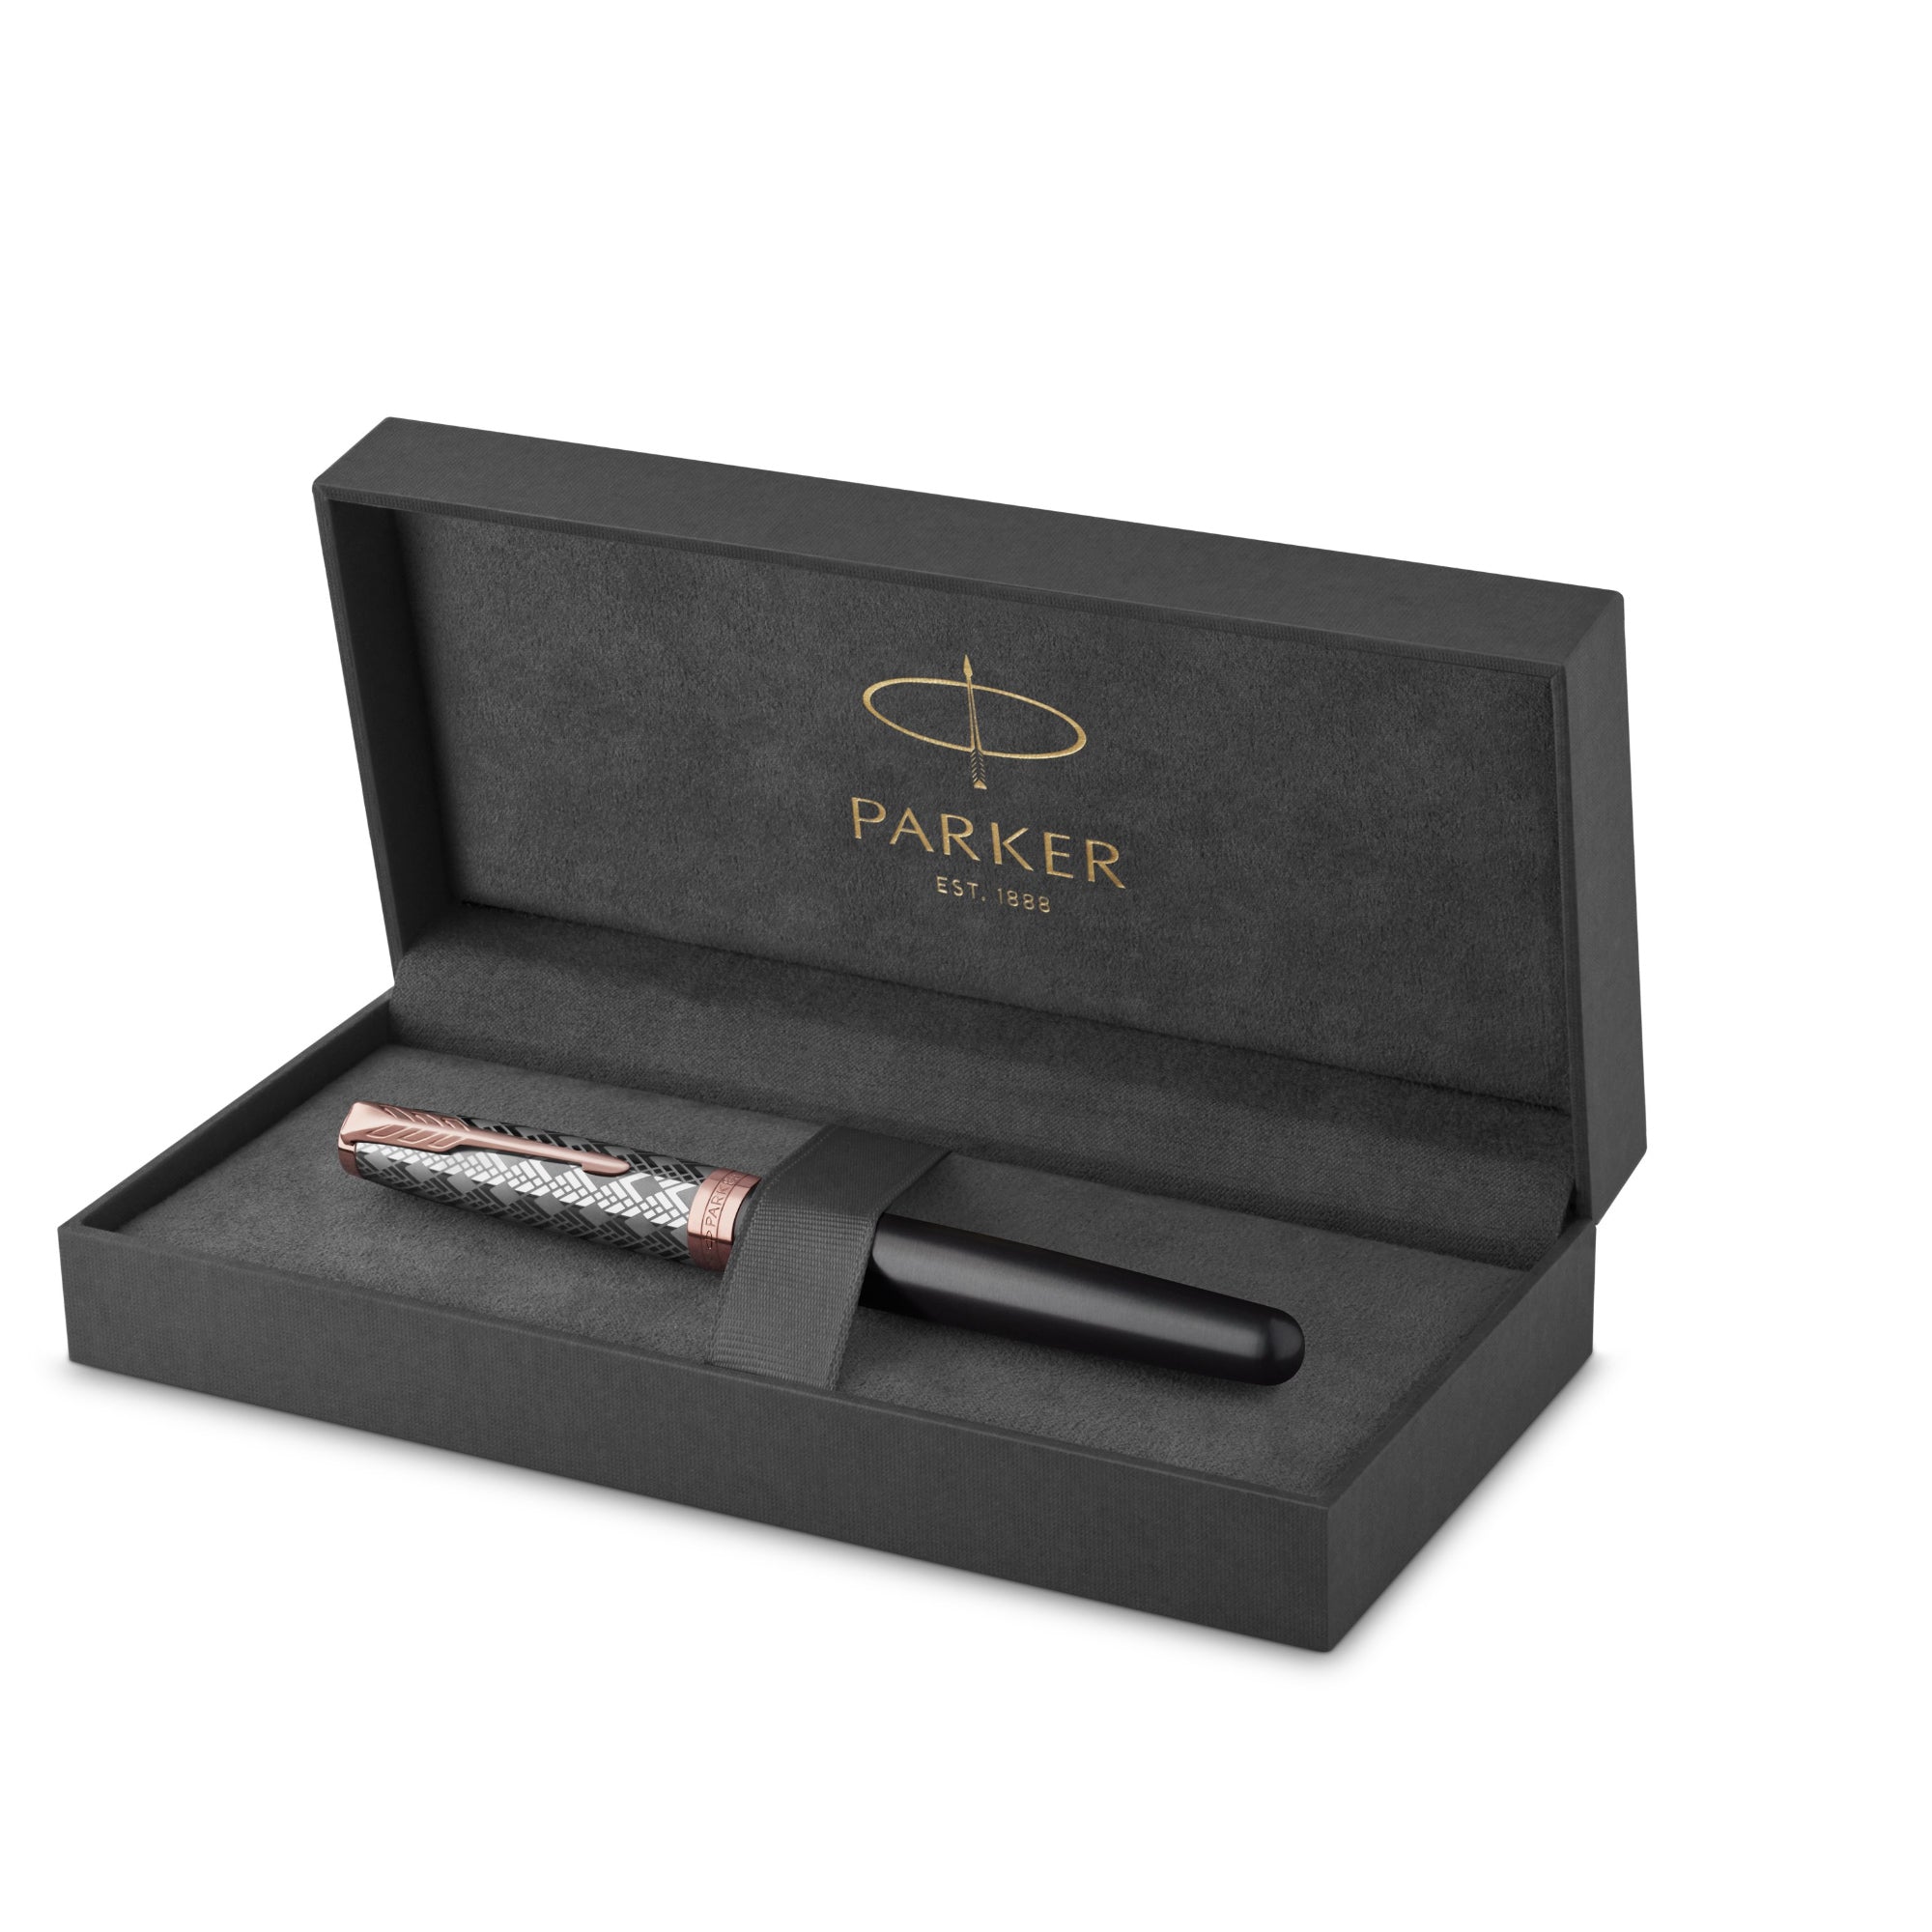 Parker Sonnet Metal and Grey Pink Gold Trim Fountain Pen - Pencraft the boutique